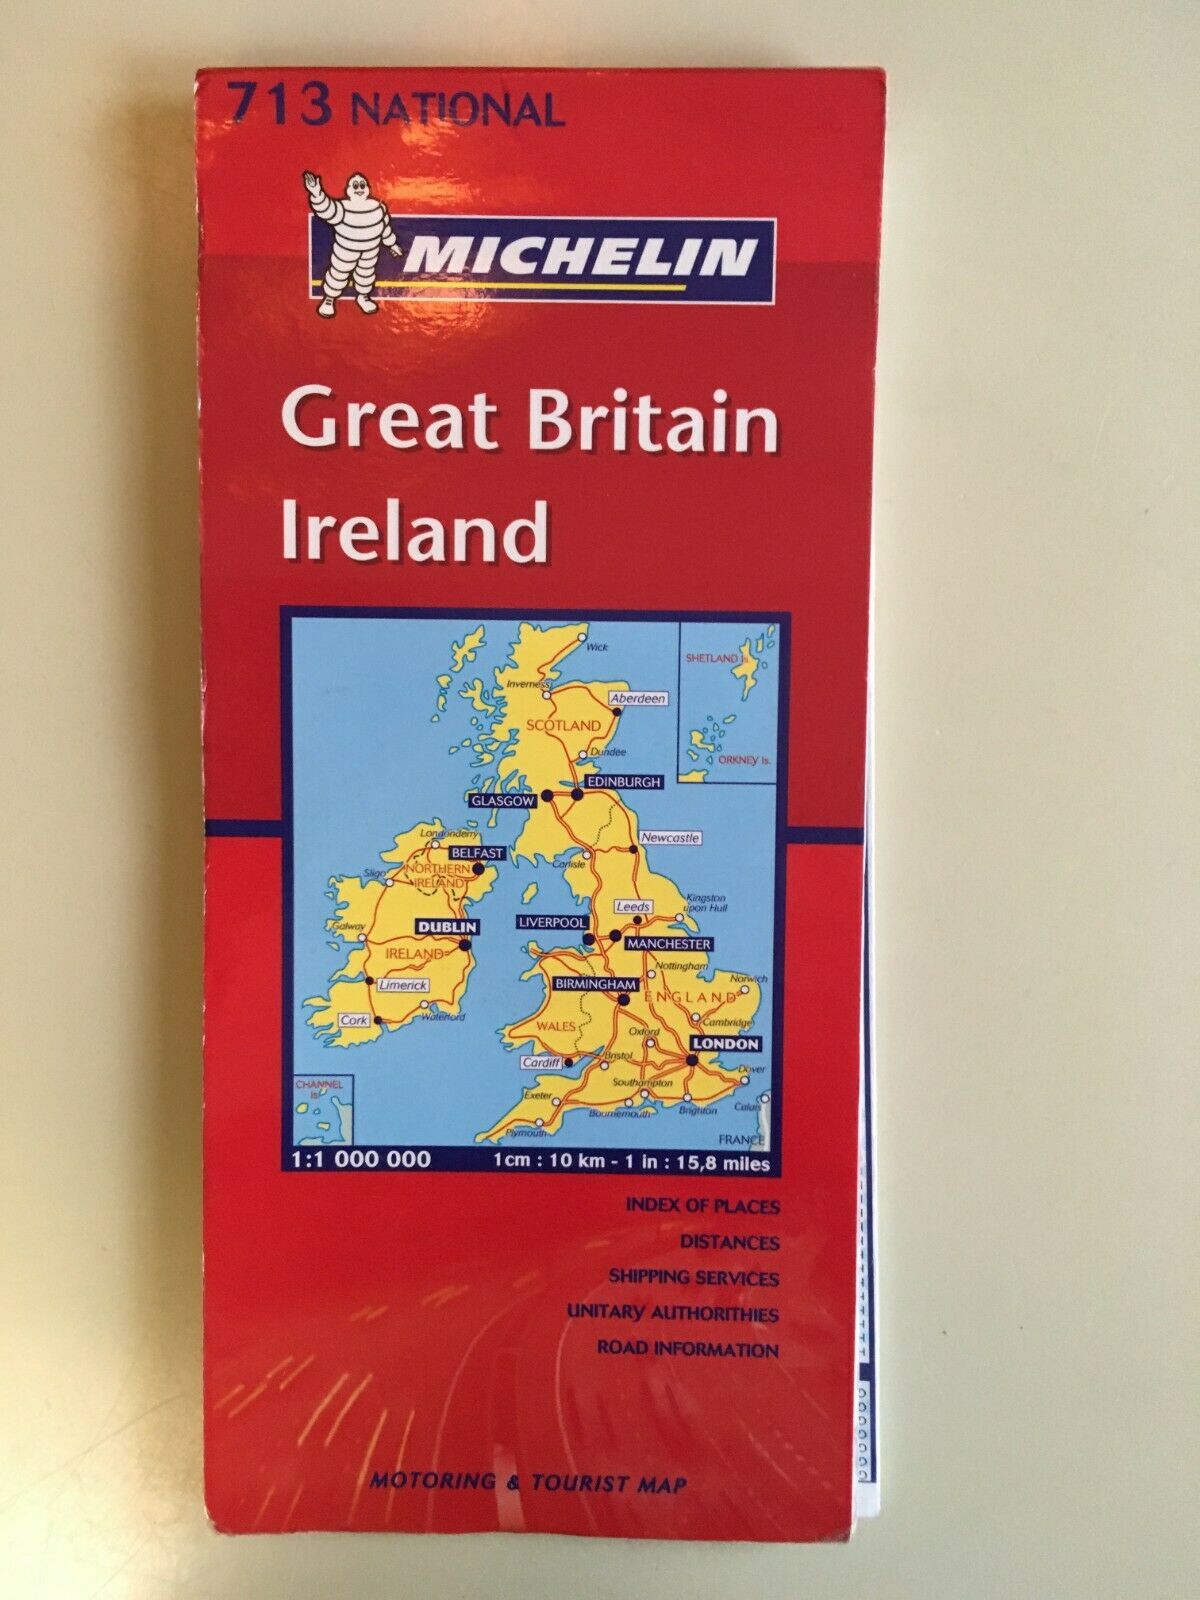 Great Britain Ireland By Michelin Travel Motoring & Tourist Map (2004, Other)